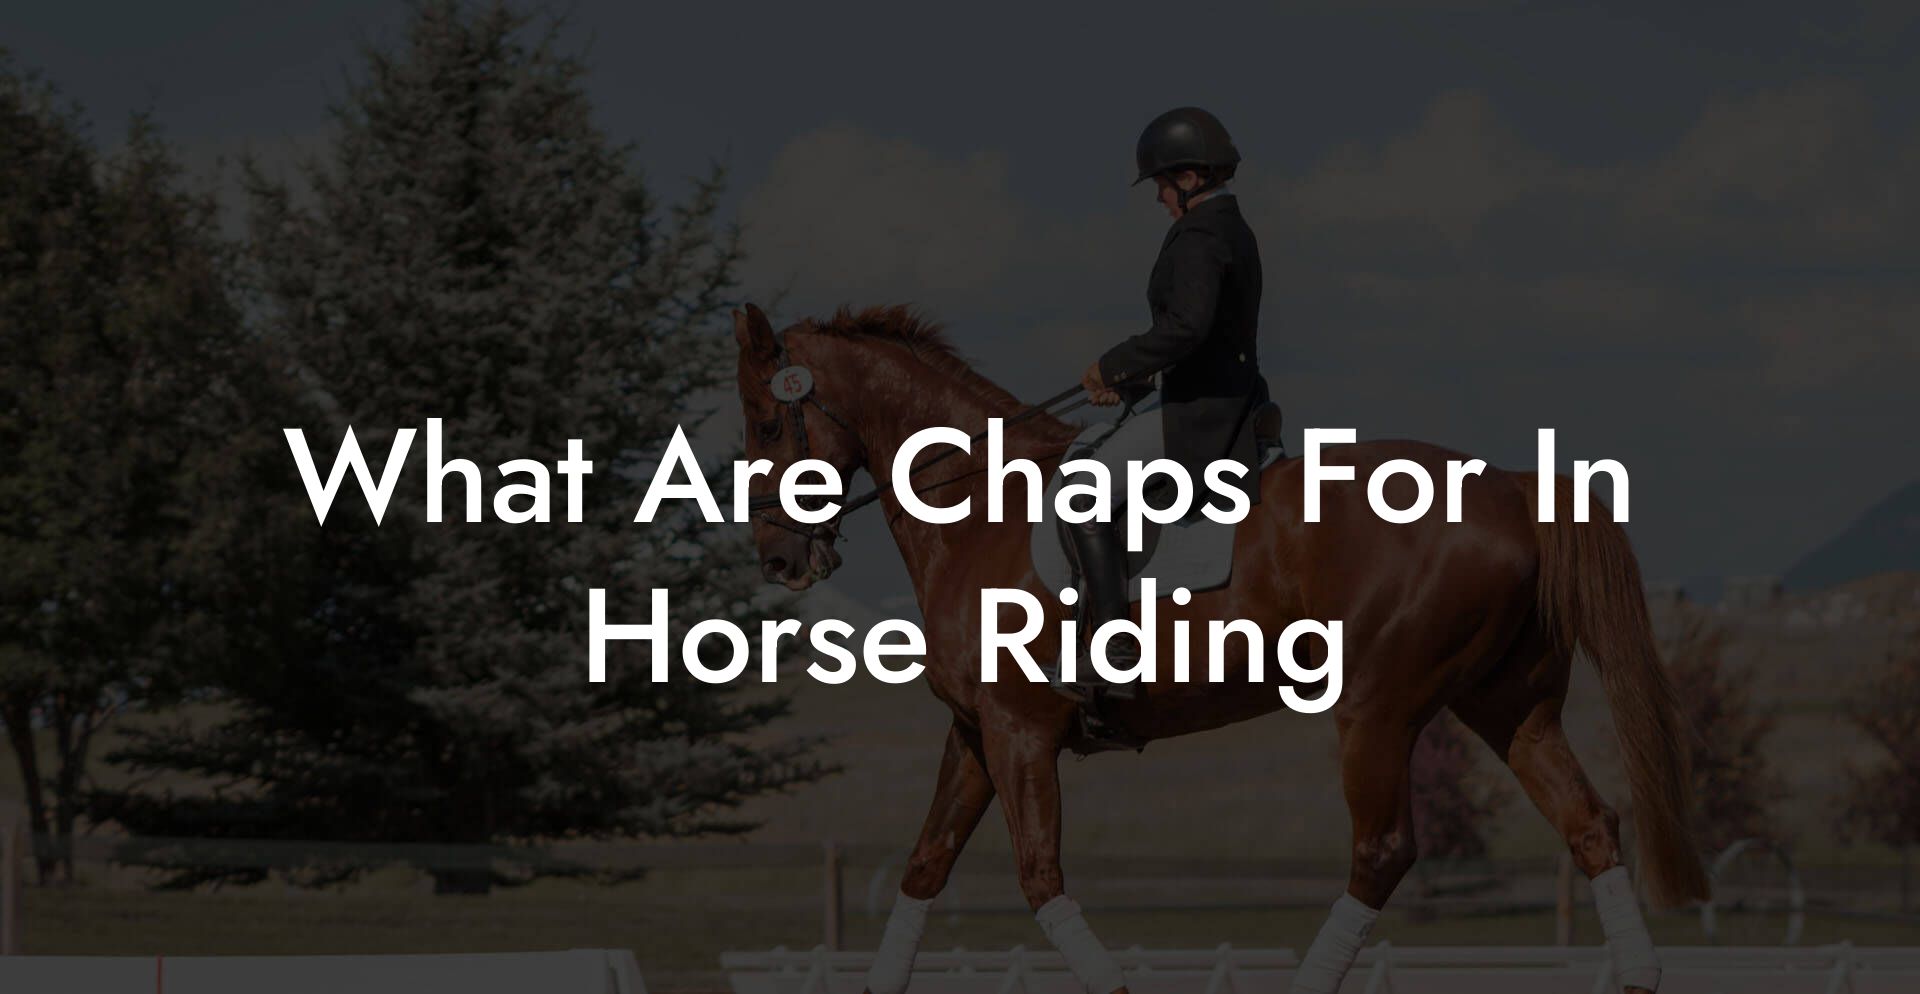 What Are Chaps For In Horse Riding